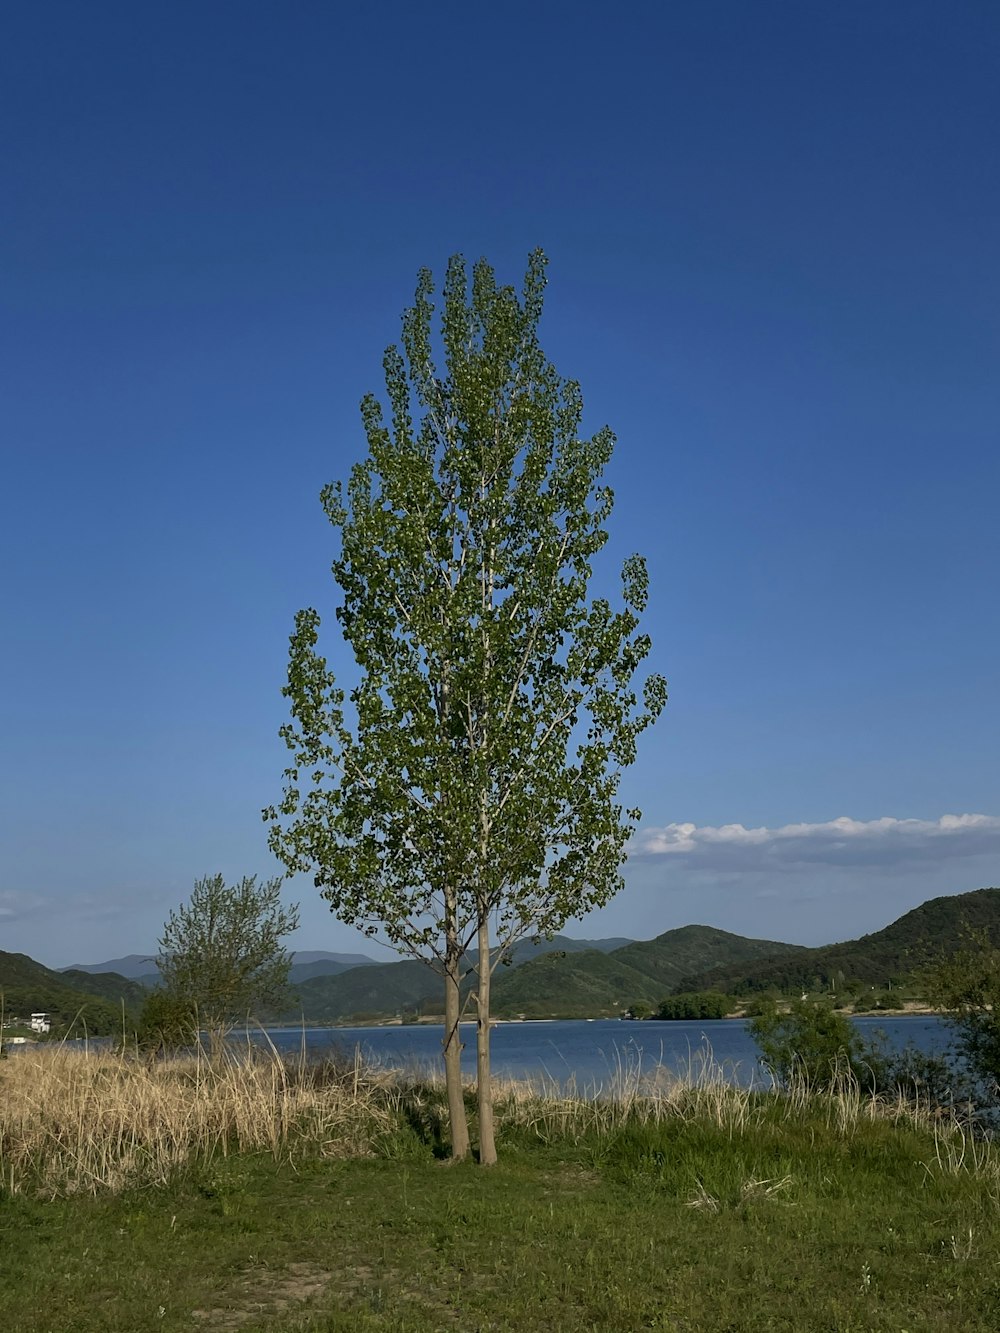 a lone tree in a grassy field next to a body of water